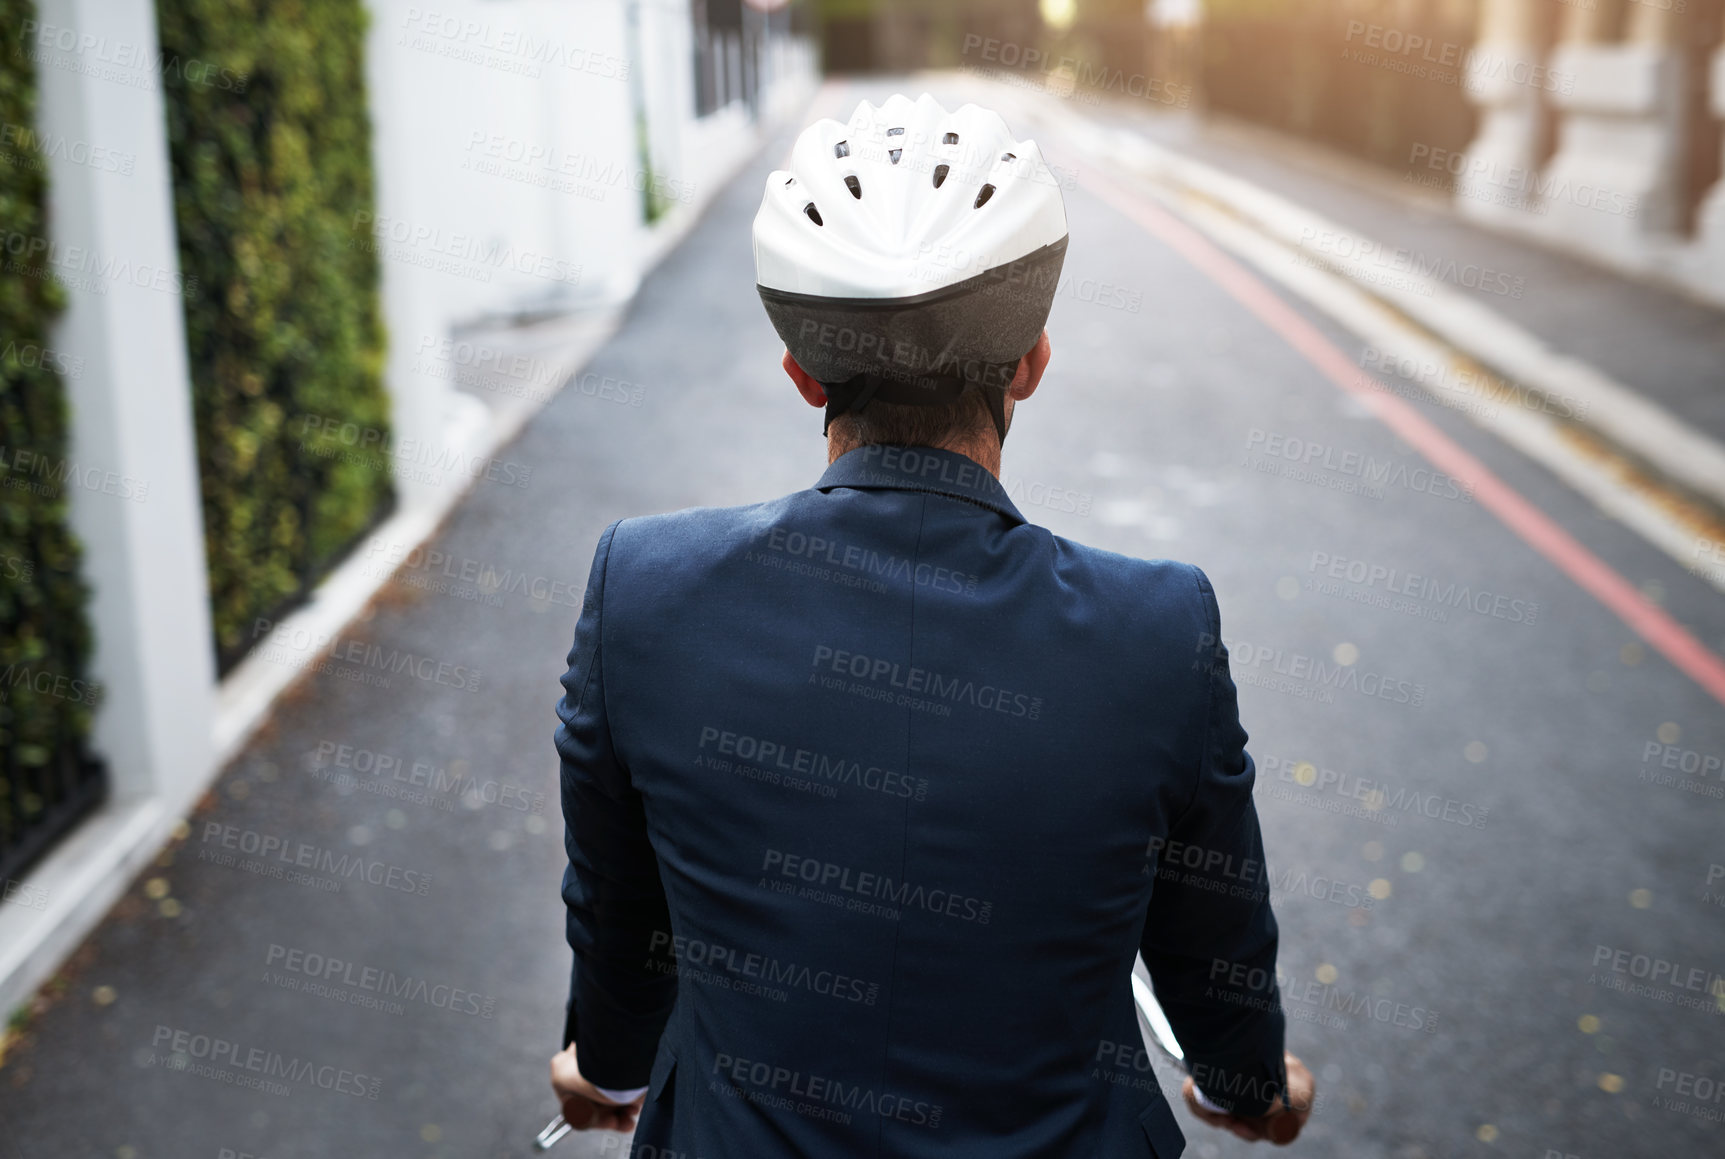 Buy stock photo Rearview shot of a handsome young businessman riding his bicycle to work in the morning